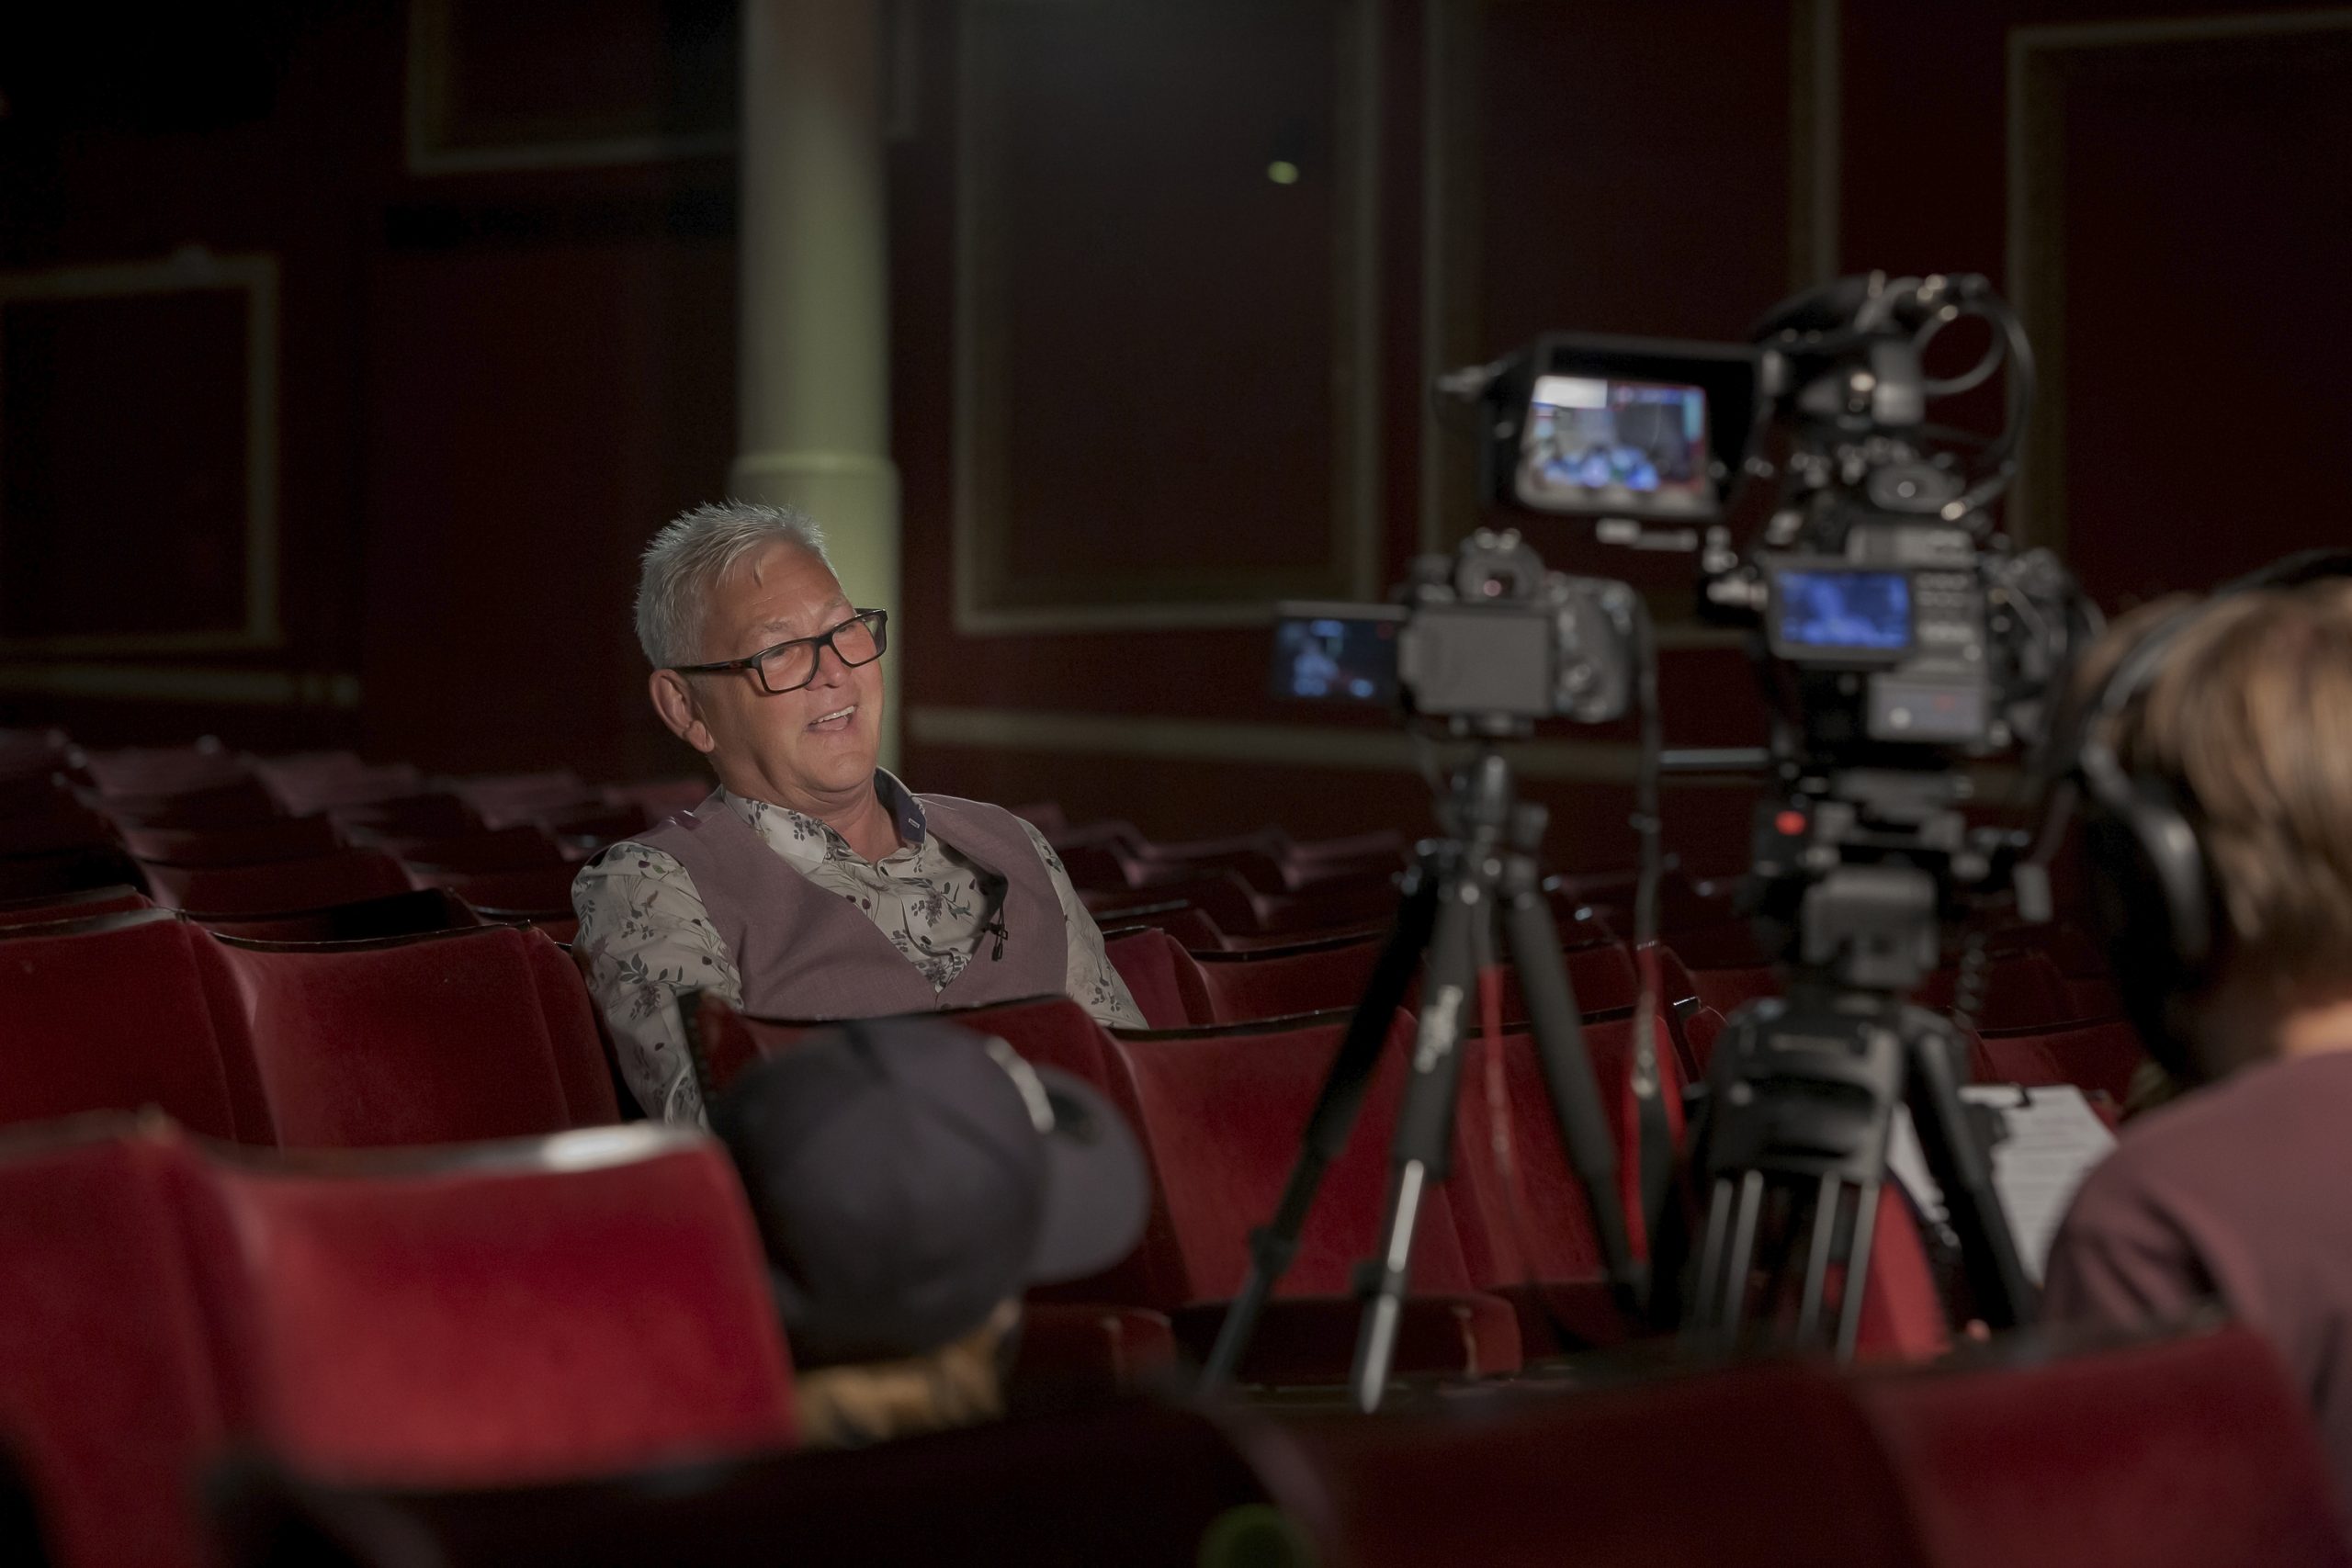 Steve Colman from Smooth Radio pictured during the Your Theatre Your Story event at the Empire Theatre. He sits in a red theatre chair in a purple waistcoat with dark rimmed glasses on and short white hair. A large filming camera with lots of wires and a camera operator with headphones on sits in the foreground on the right hand side of the screen